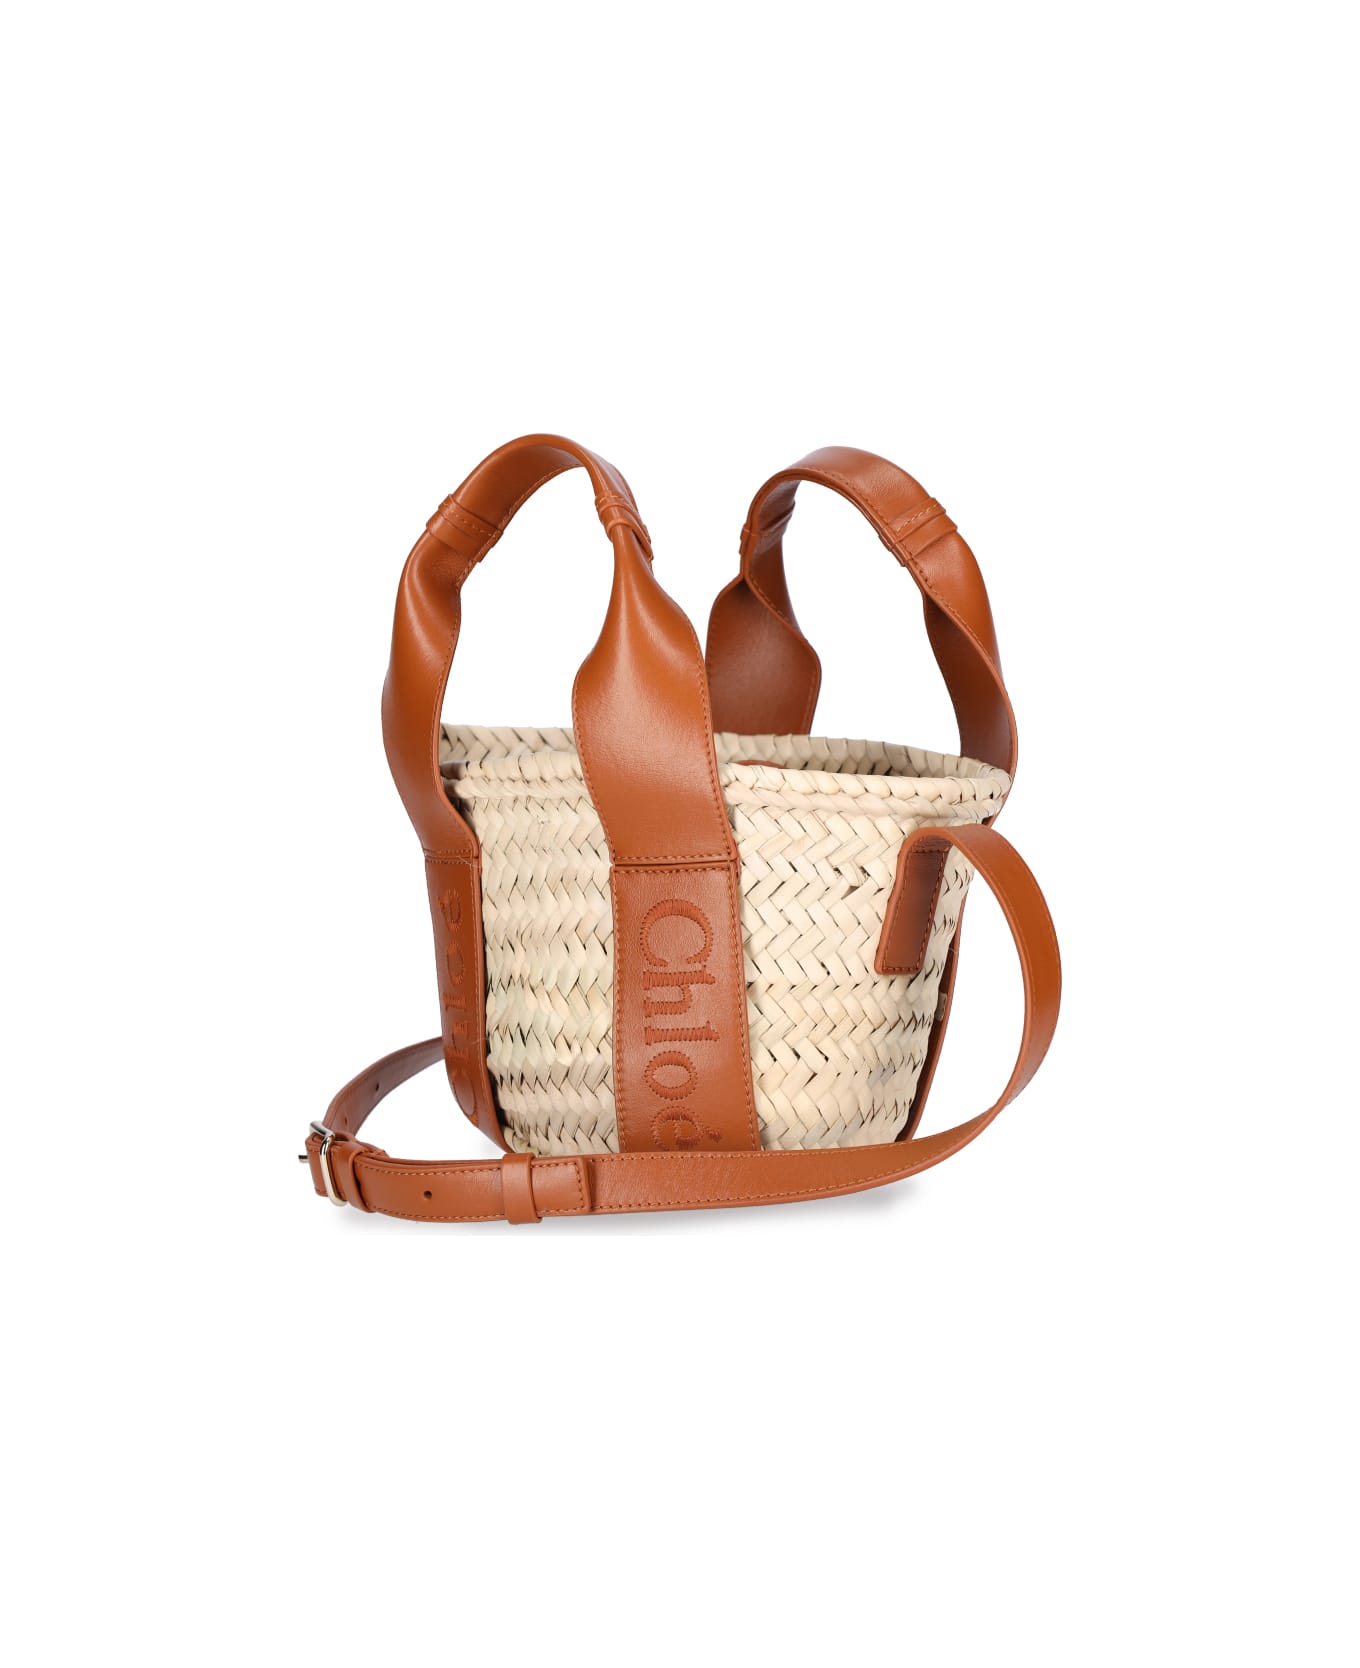 Chloé Sense Small Tote Bag In Nat Raffia And Brown Leather - Brown